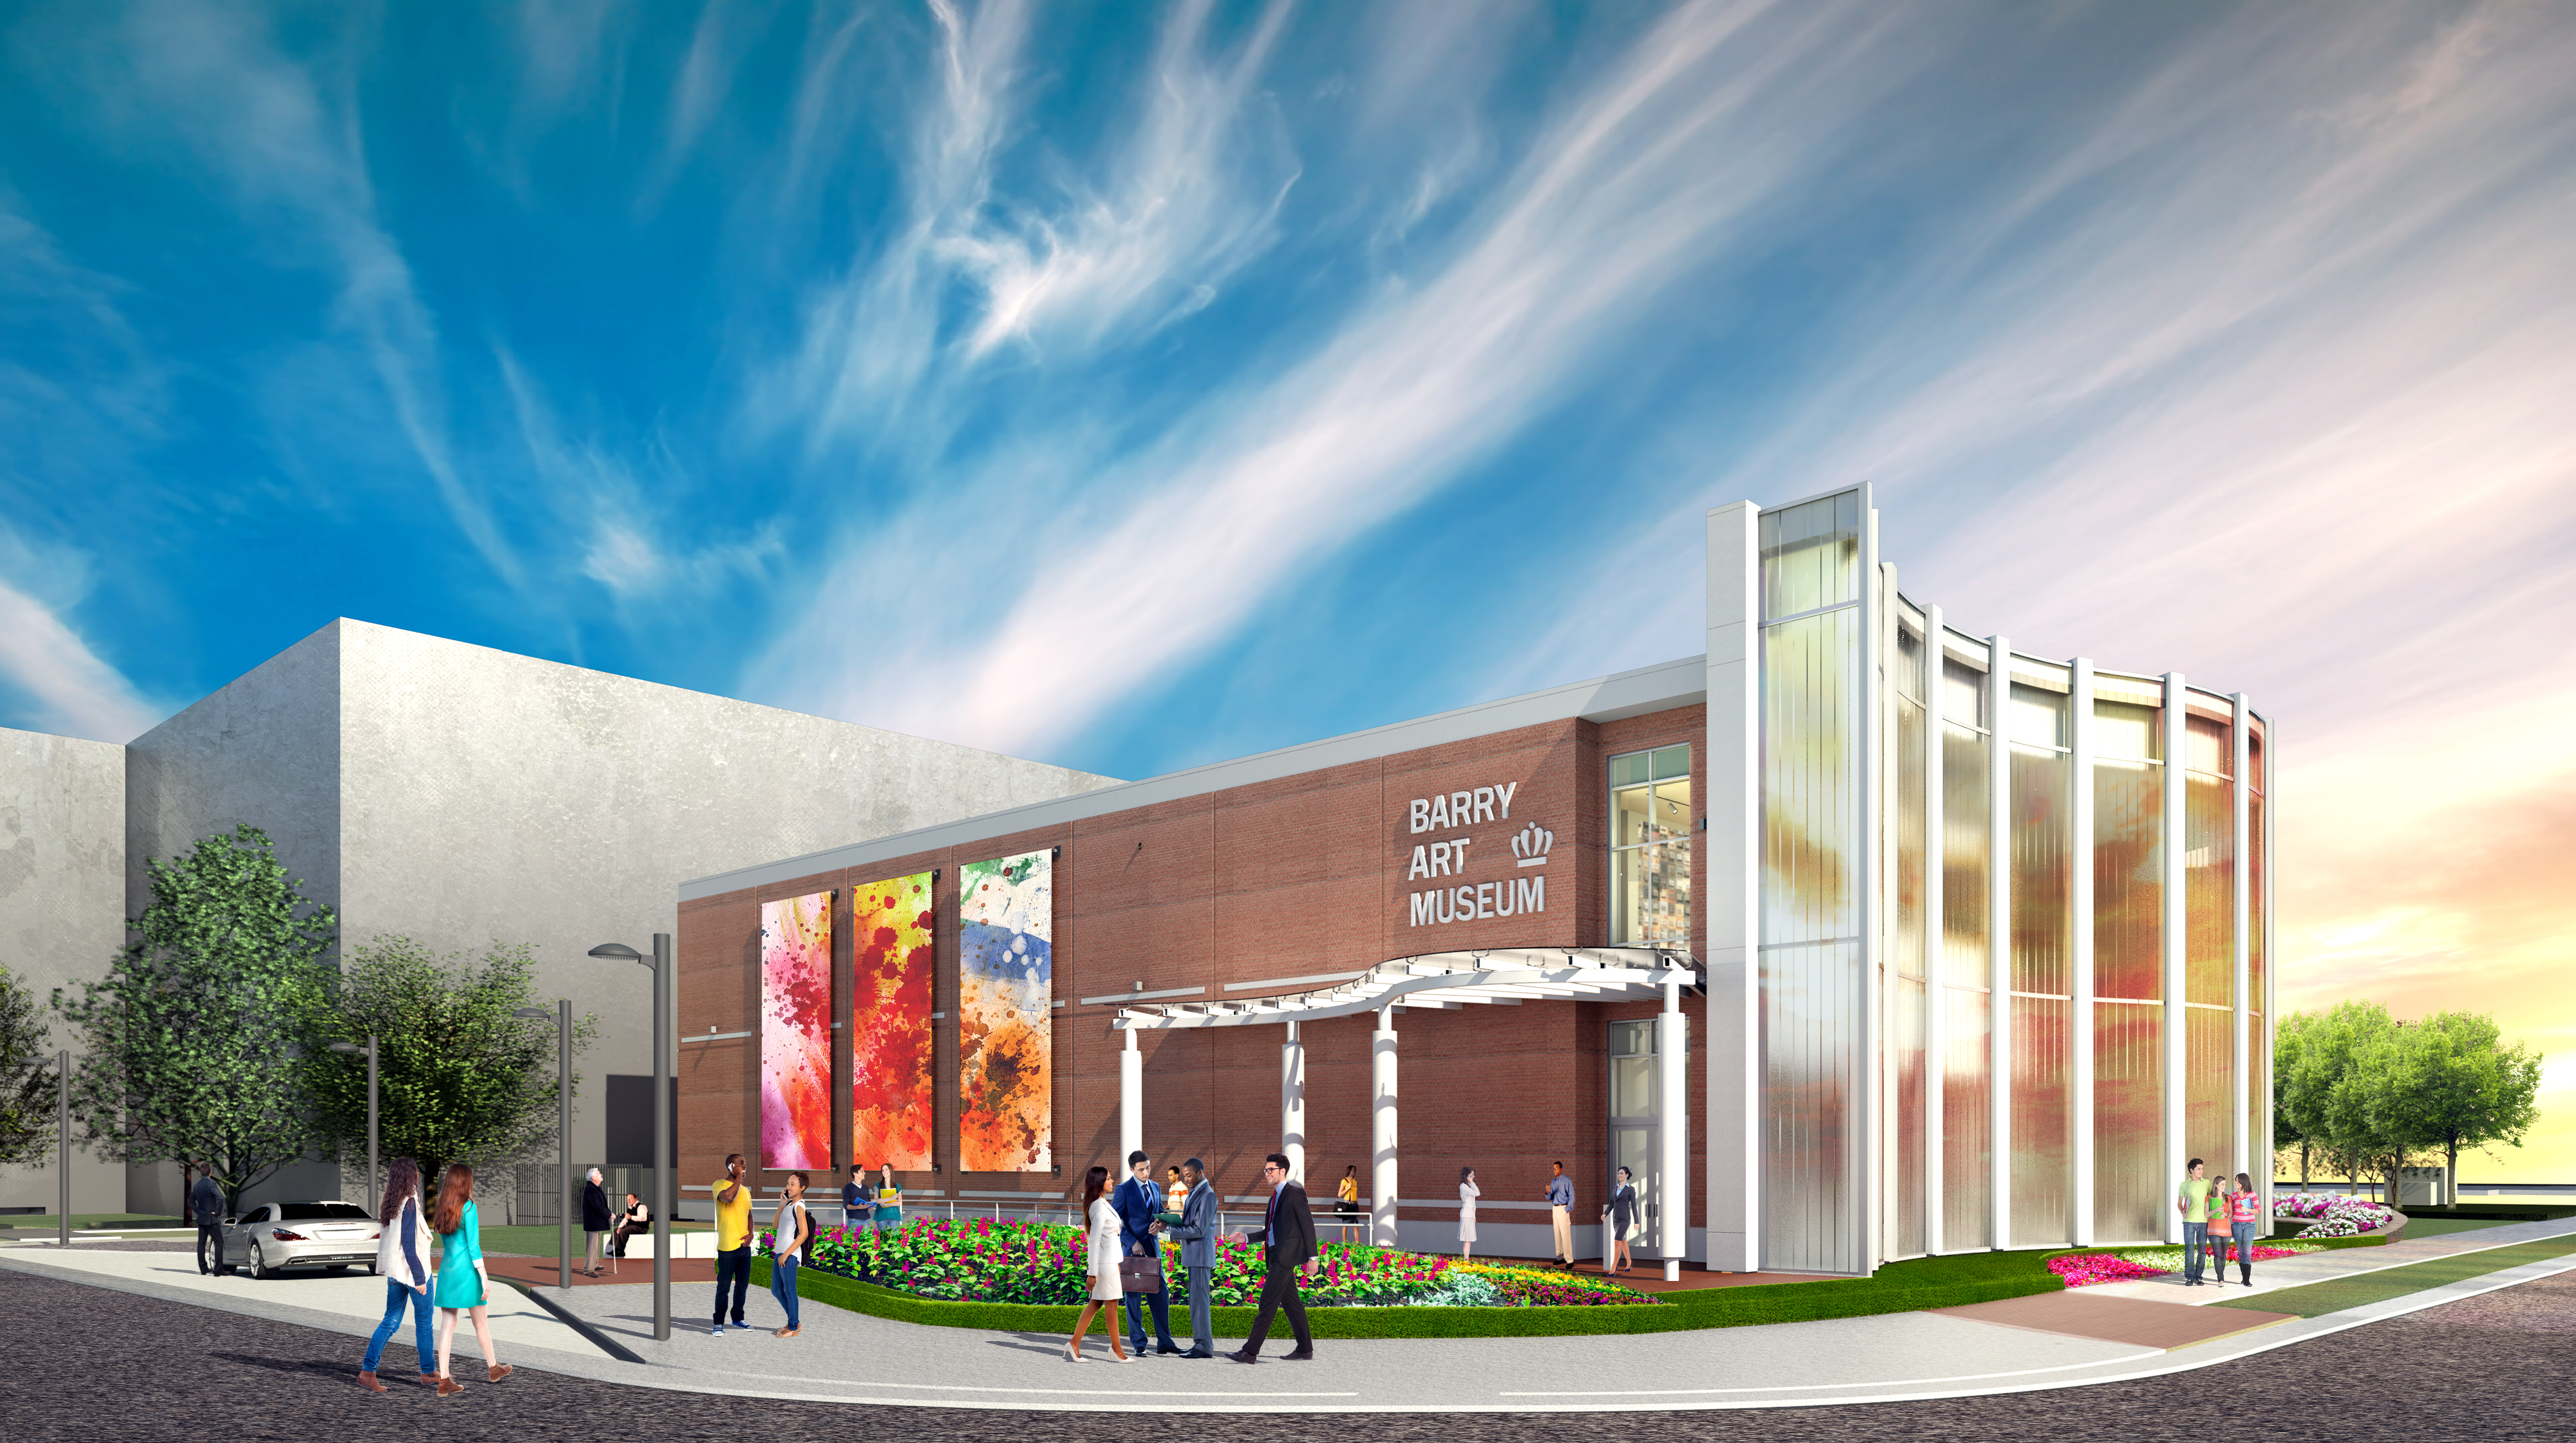 Architectural rendering of the Barry Art Museum